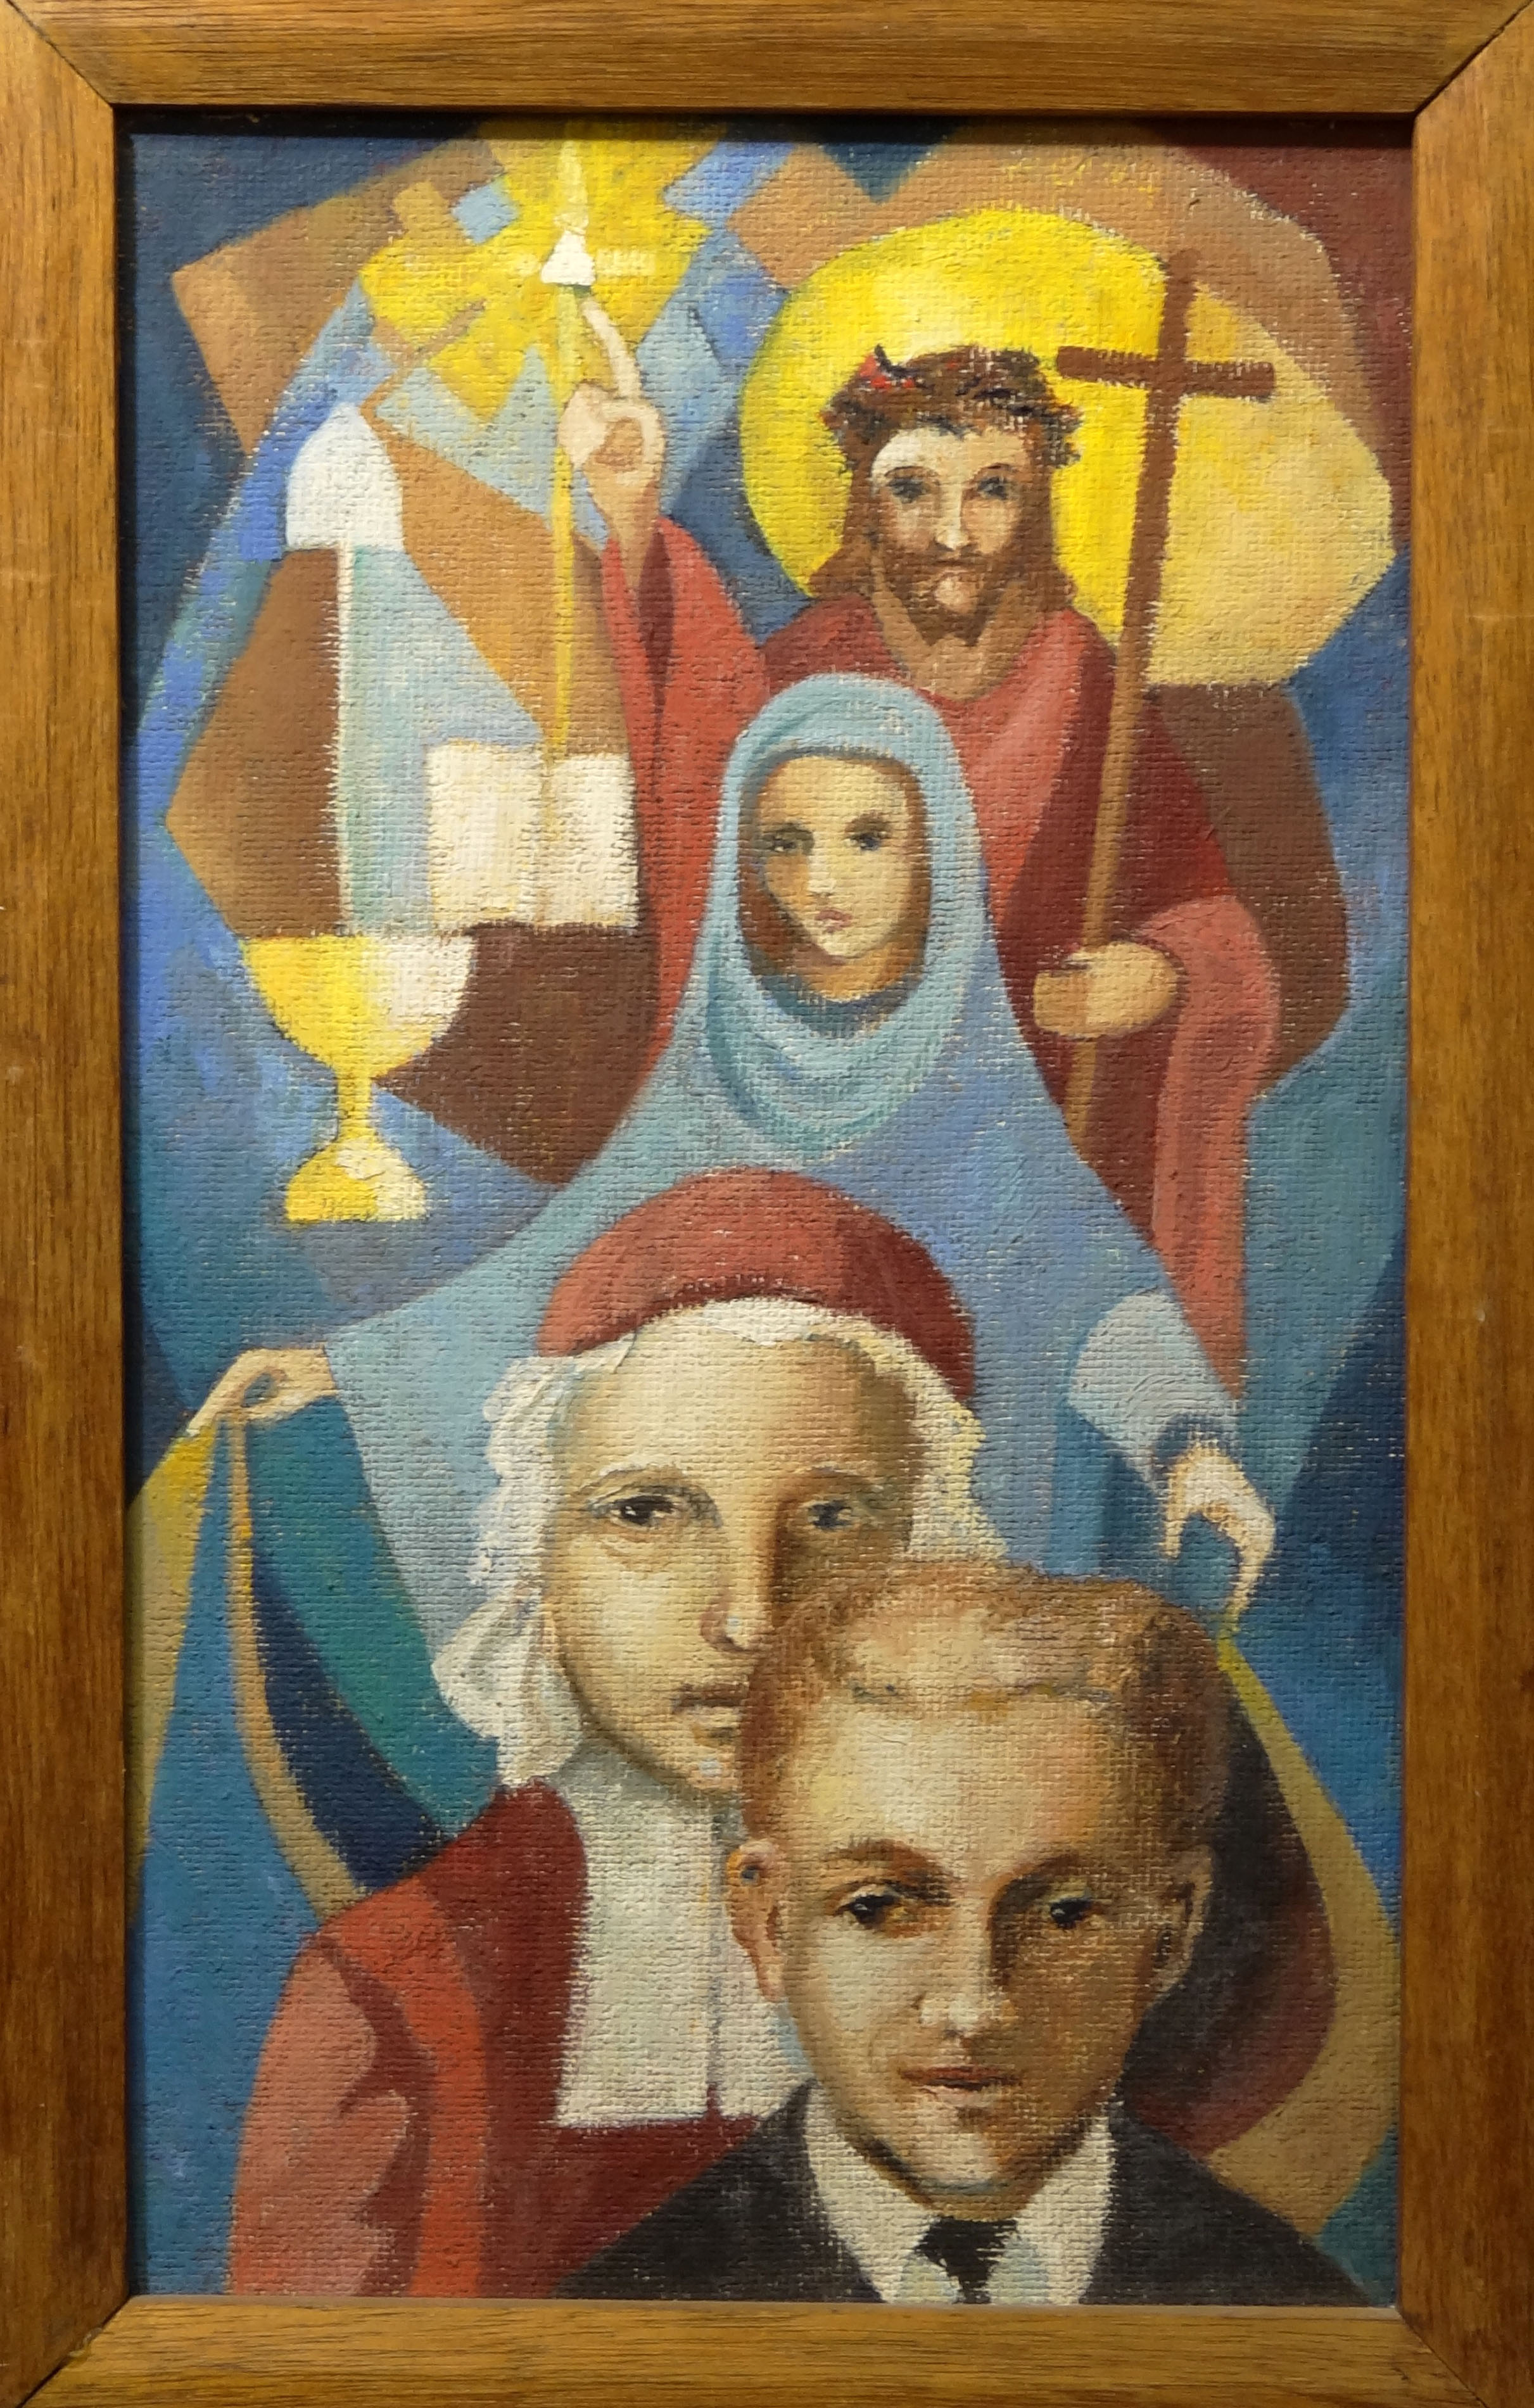 “Christ, Mary, Chaminade and Student” was painted by Francis J. Grisez.